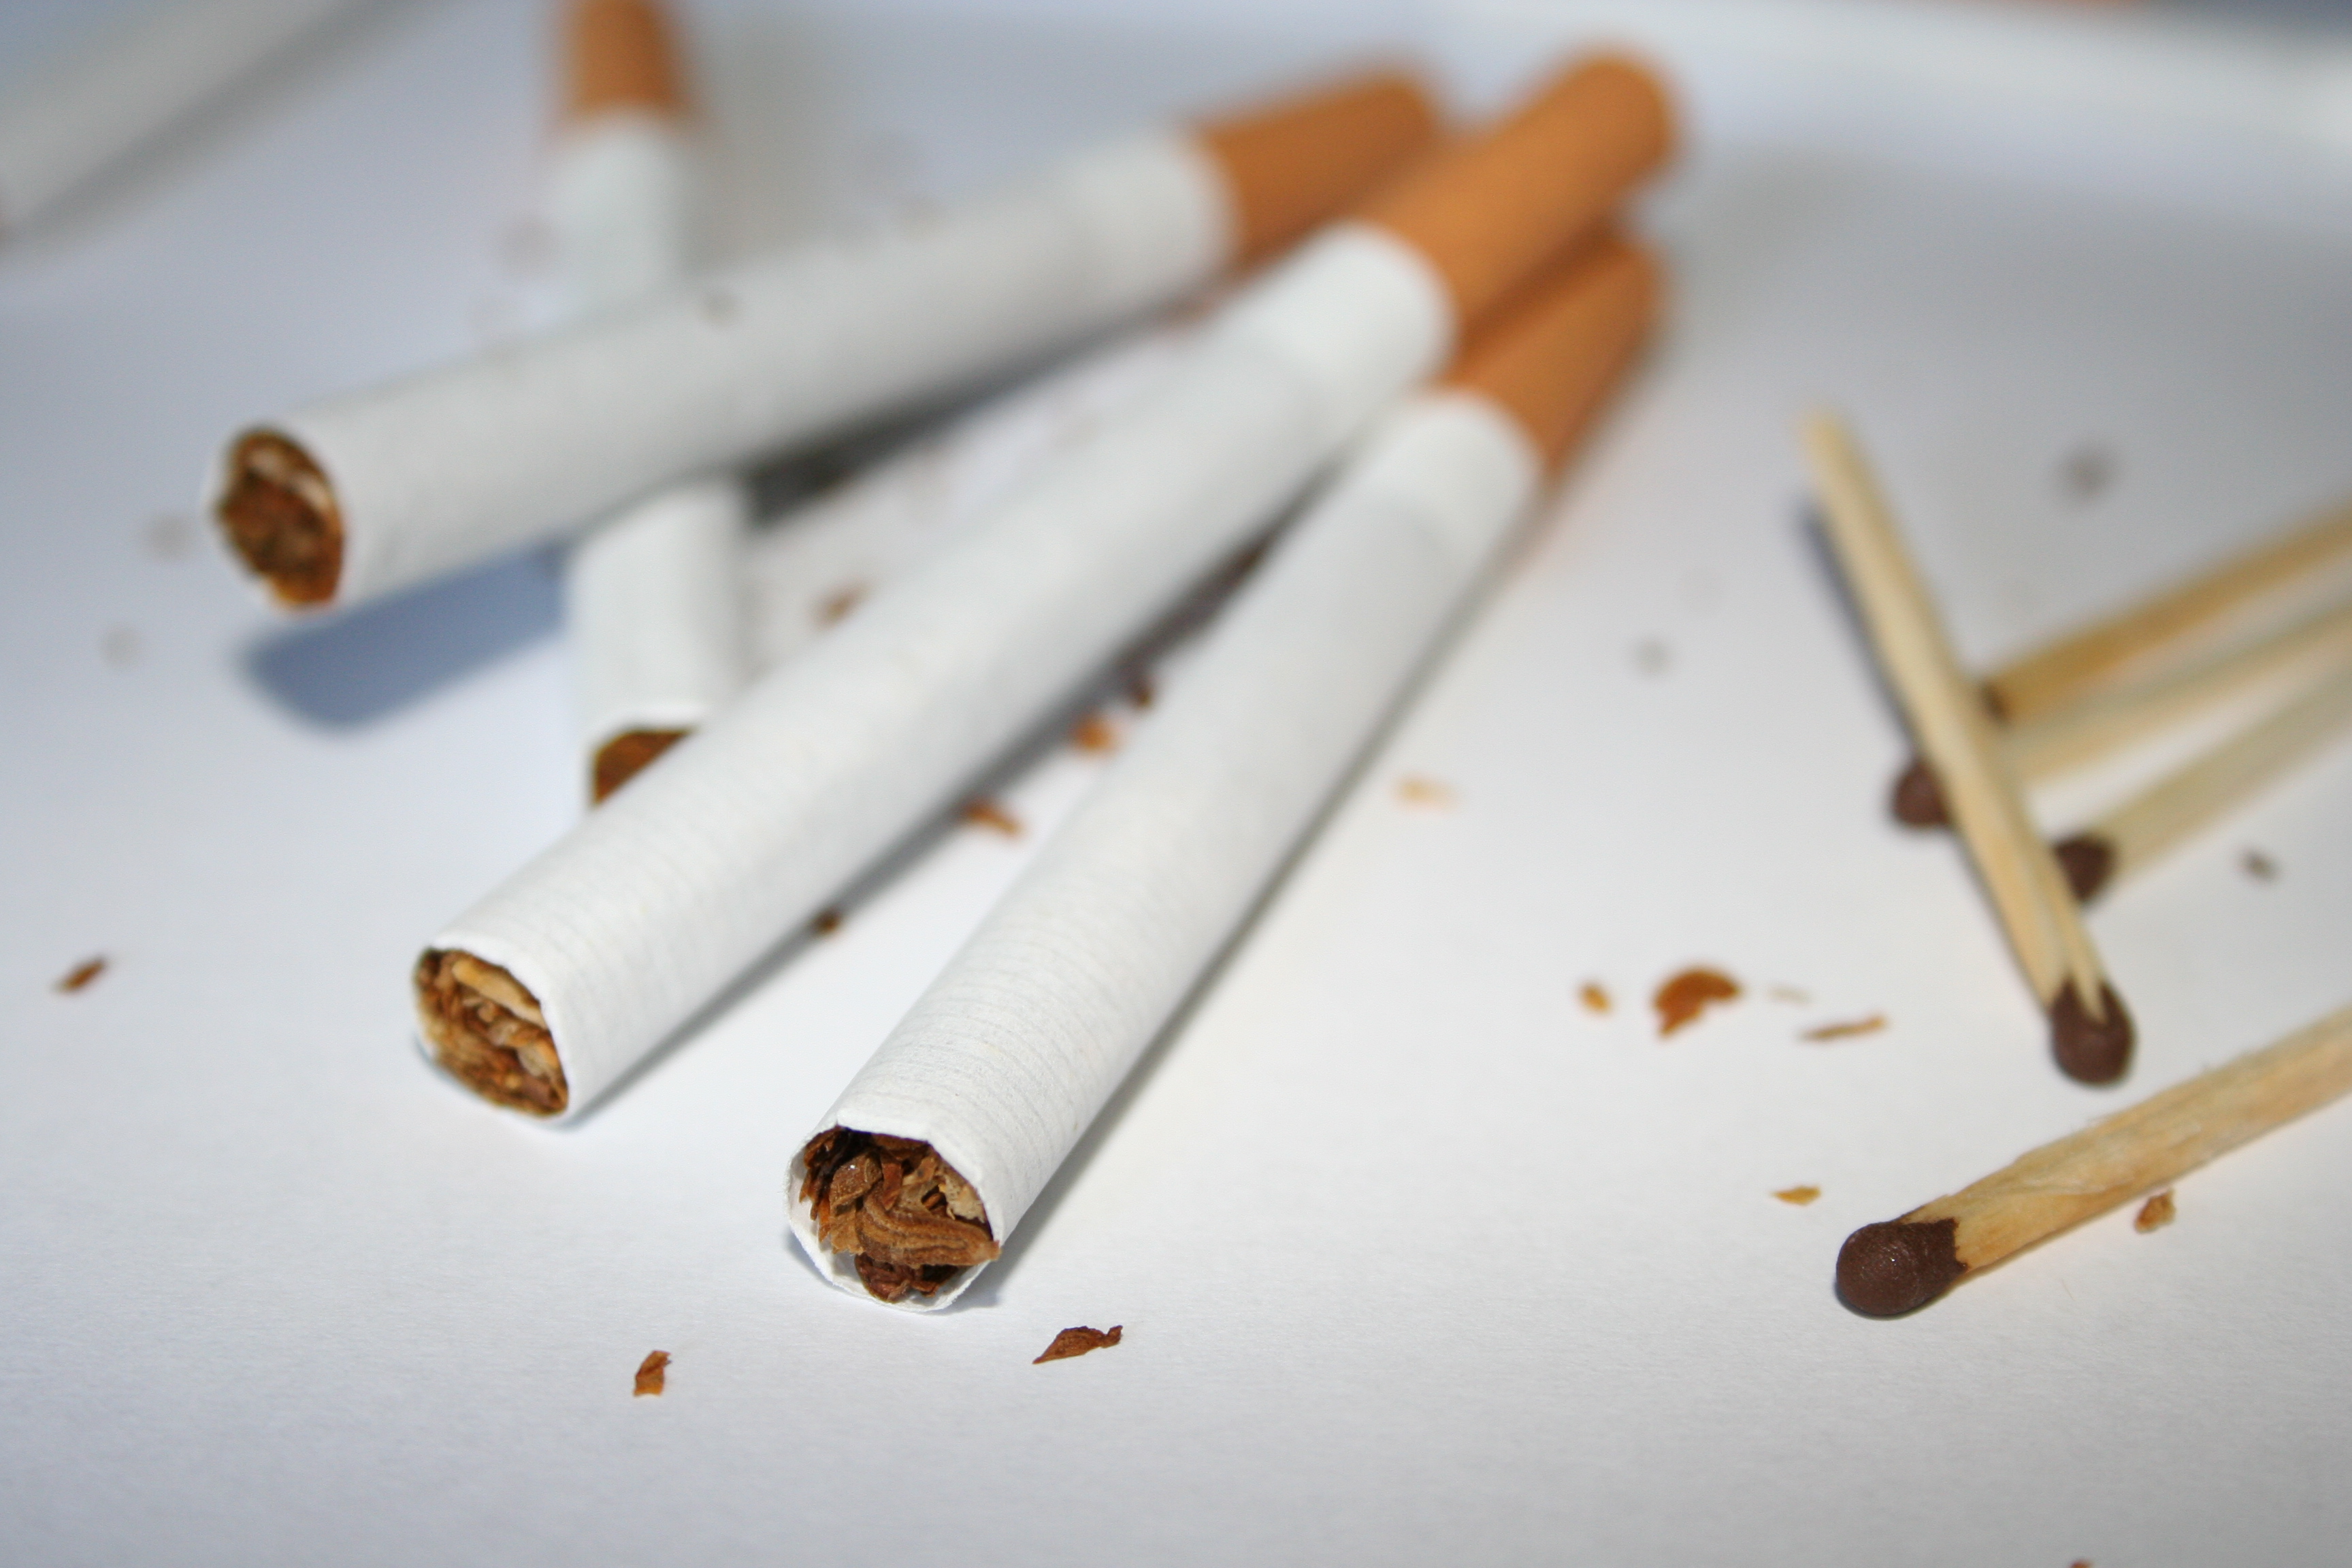 16.5% of all cigarettes consumed in 2015 were illiegal